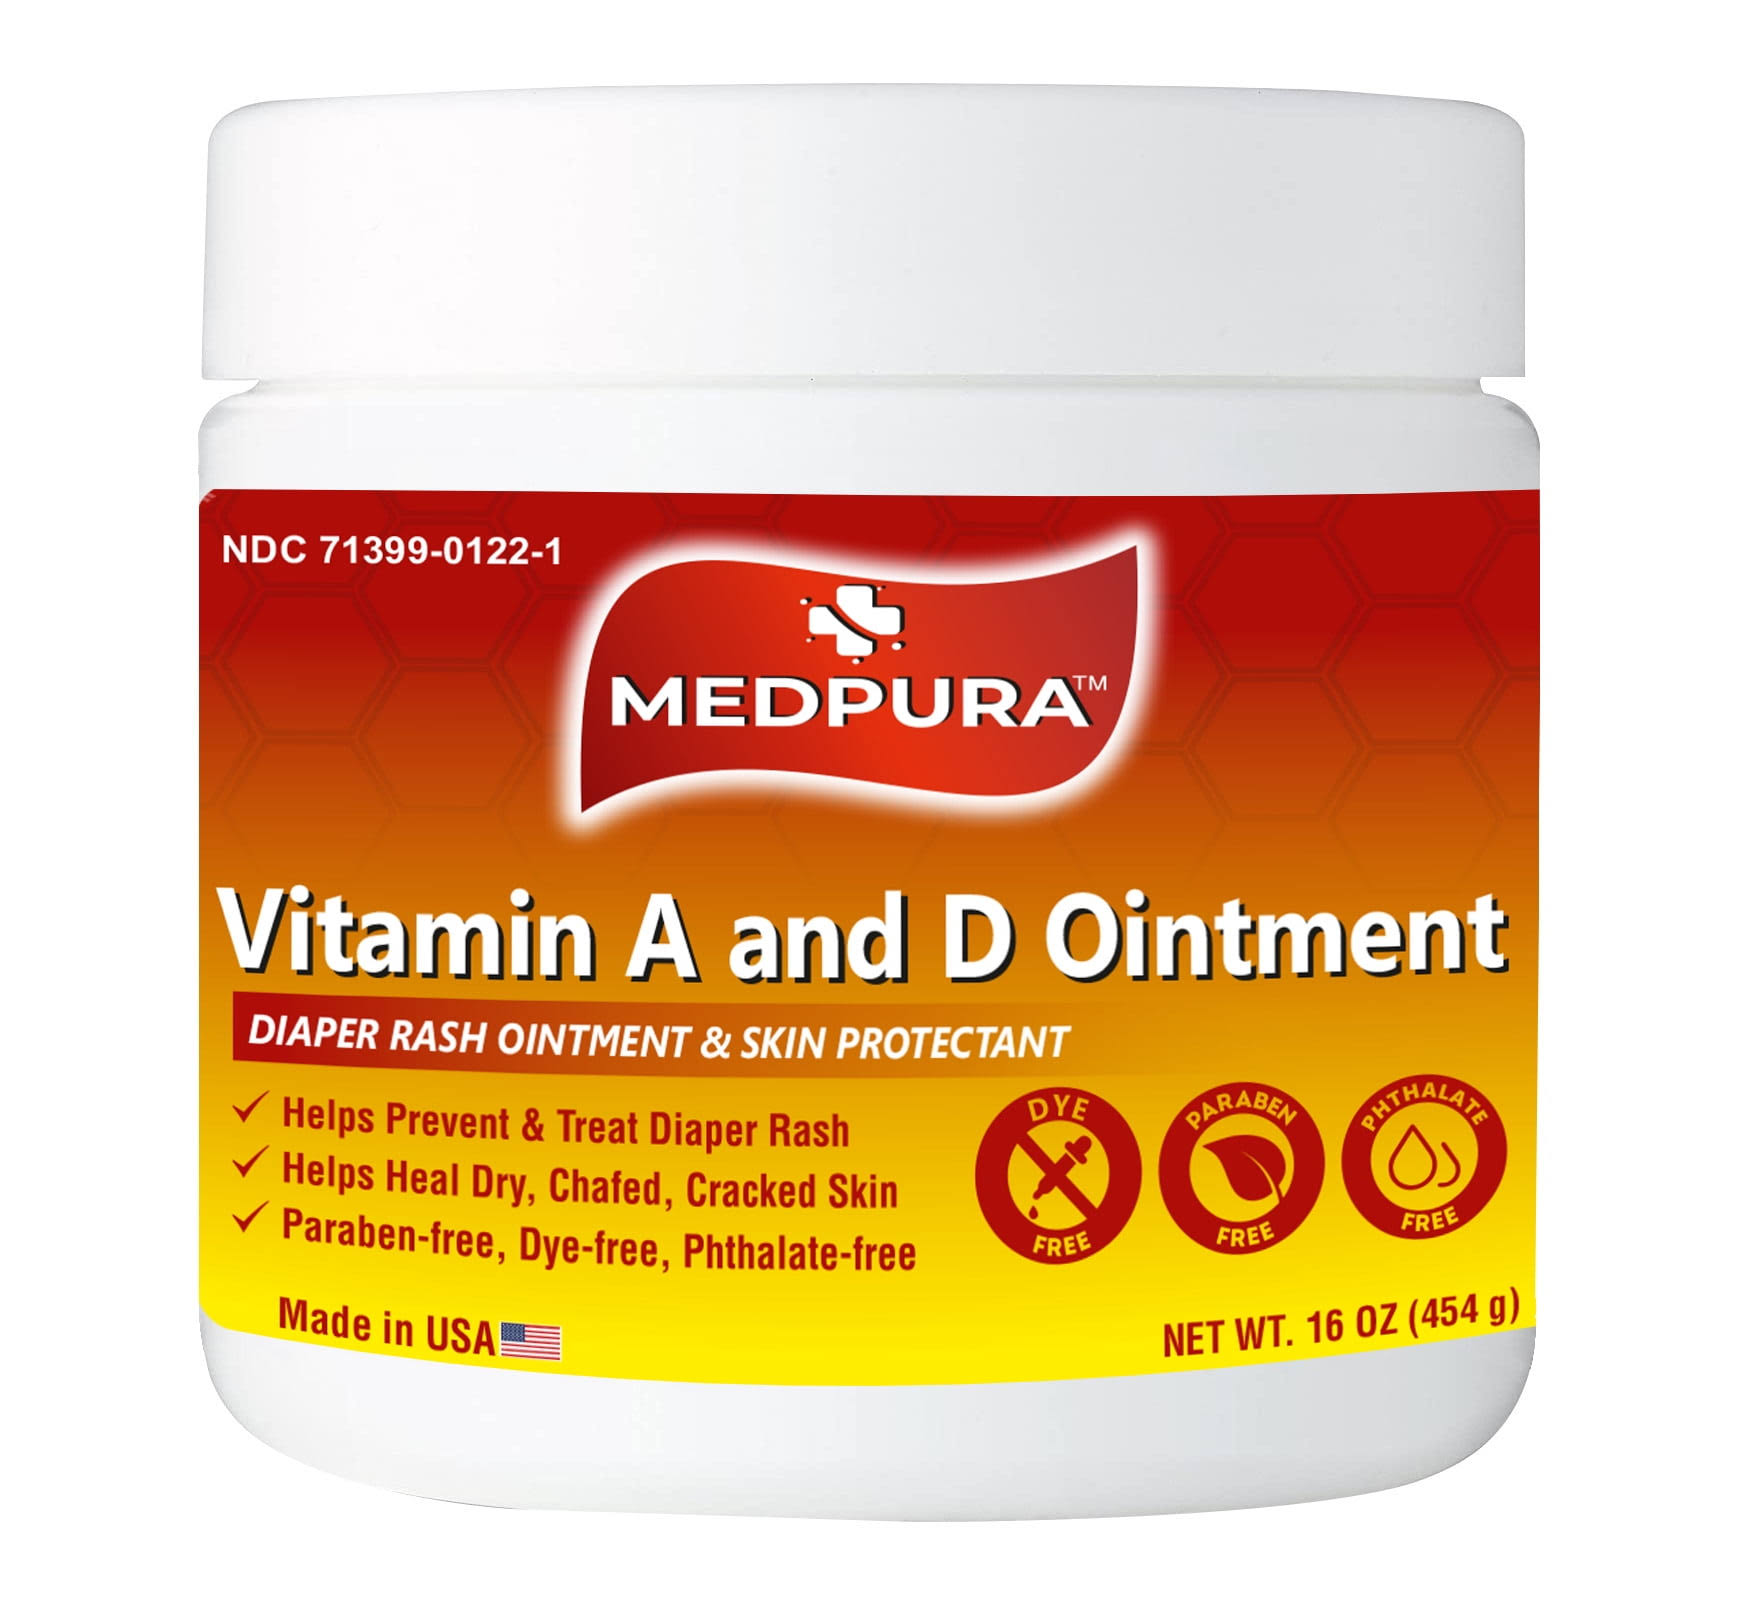 Vitamin A and D Ointment Skin Protectant